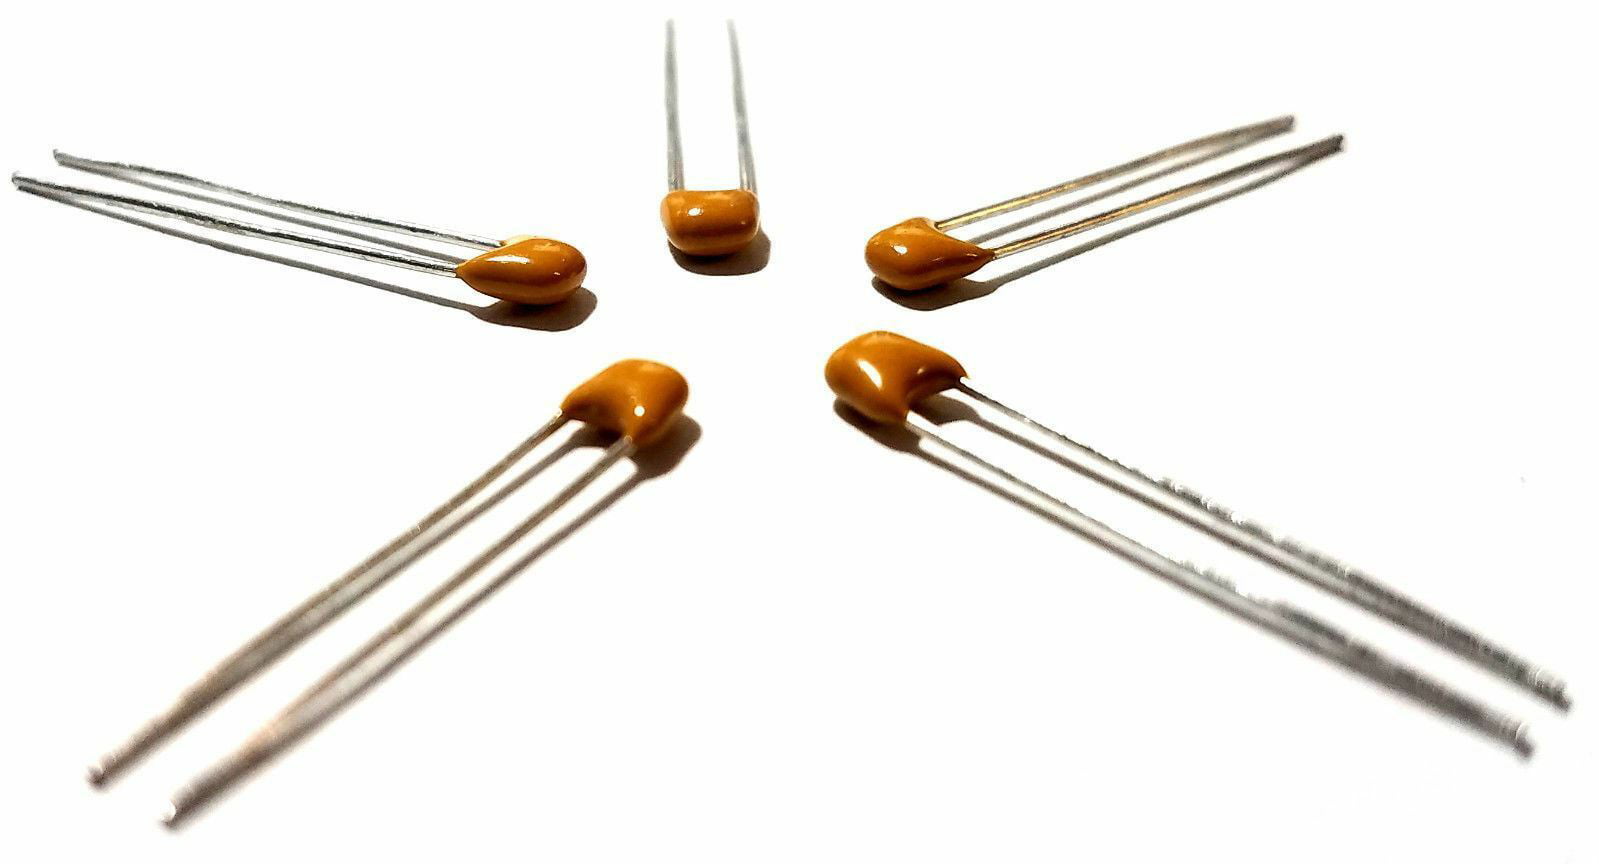 Pack of 2 Inc. 0.68 µF Capacitance 50V NTE Electronics CML684M50 Series CML Ceramic Multilayer Capacitor 20% Tolerance 